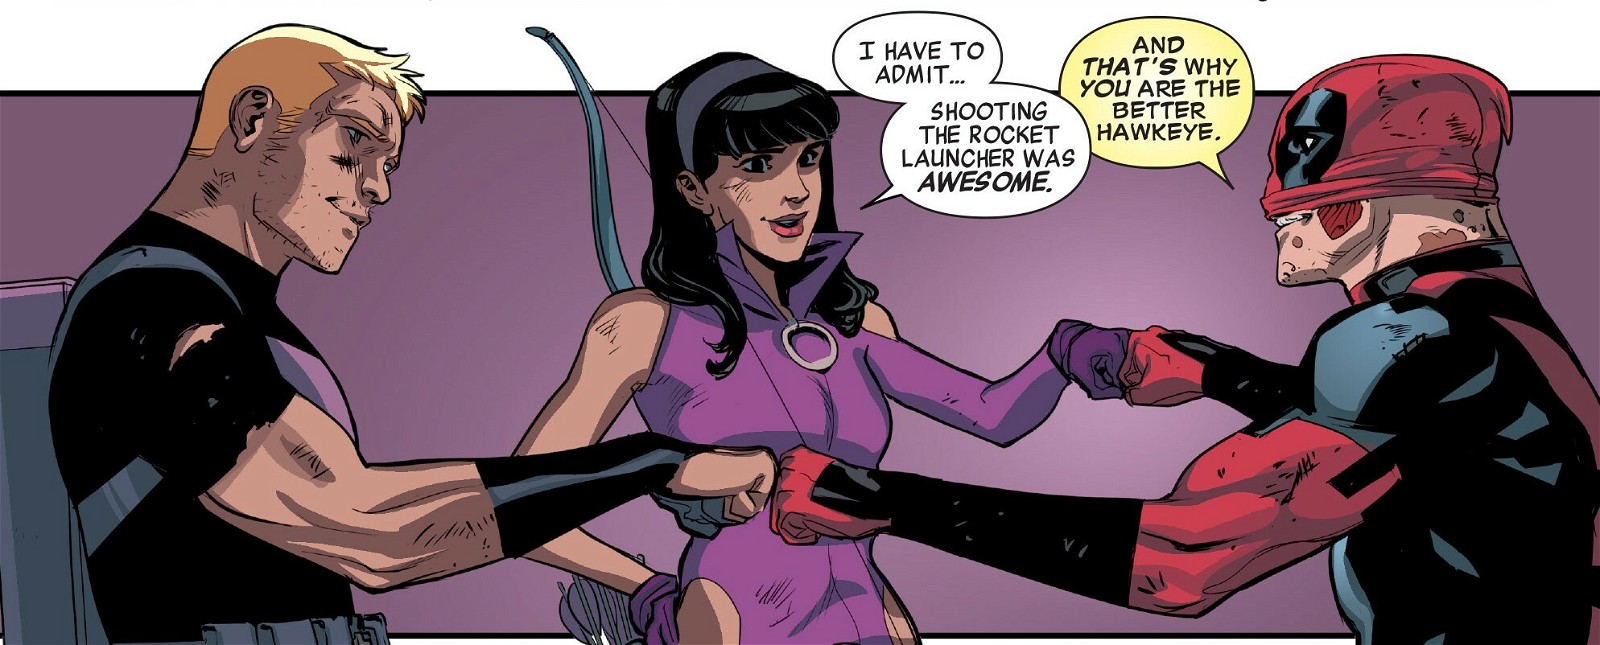 Kate Bishop, Clint Barton, and, Deadpool fight it out in the comics.